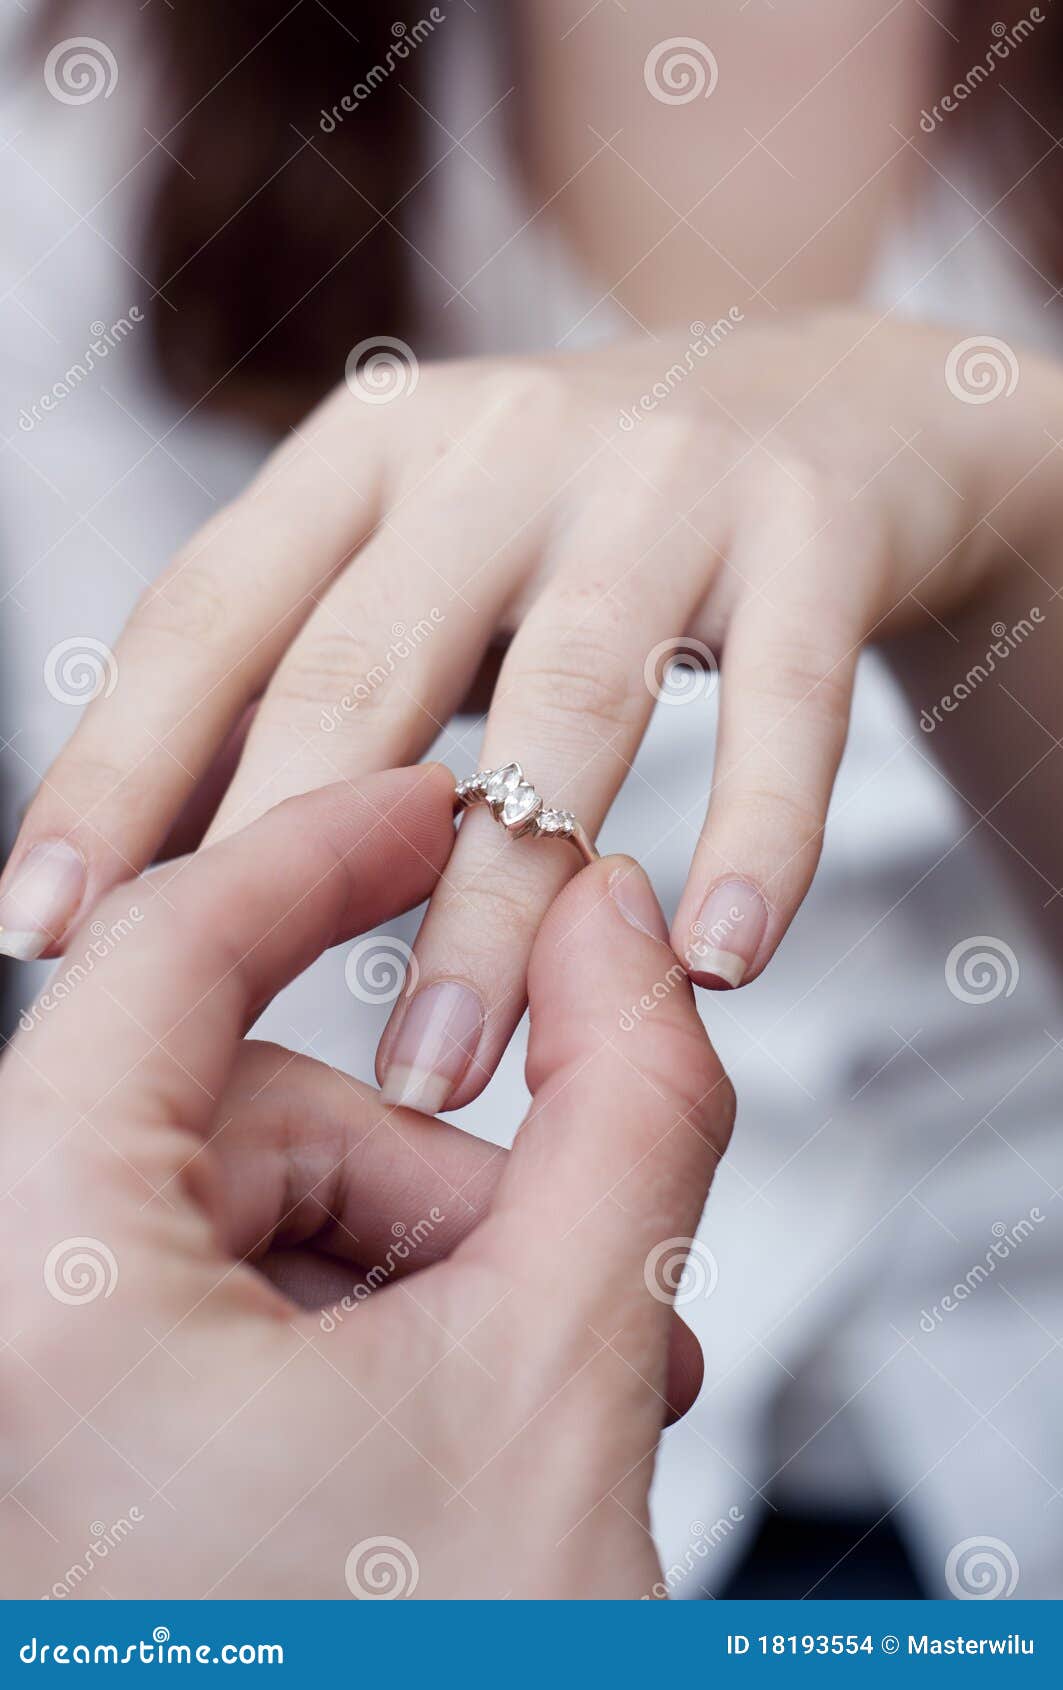 Engagement Ring Into A Finger Stock Images - Image: 18193554